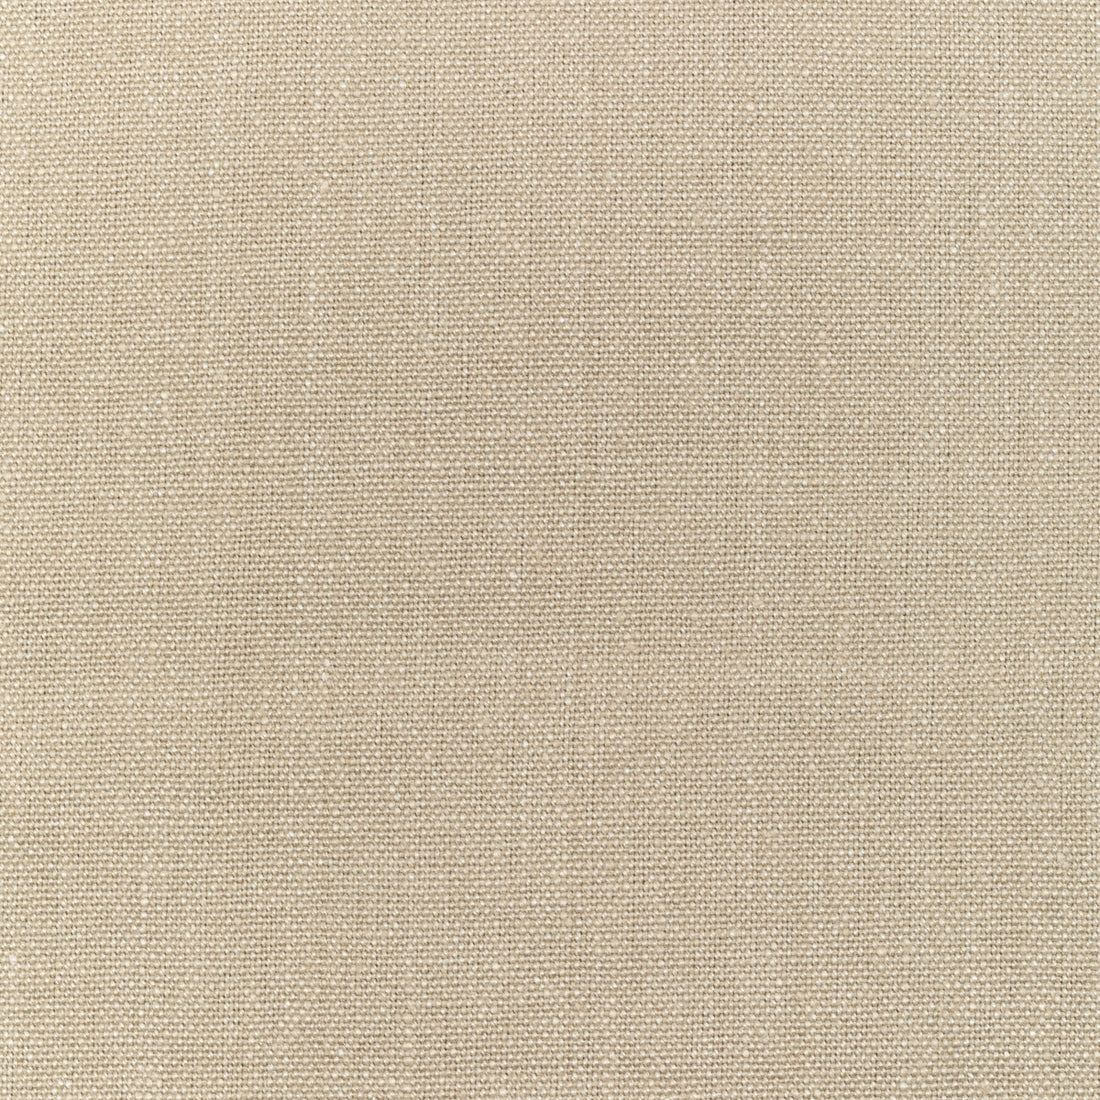 Knightsbridge fabric in oatmeal color - pattern PF50199.230.0 - by Baker Lifestyle in the Perfect Plains collection